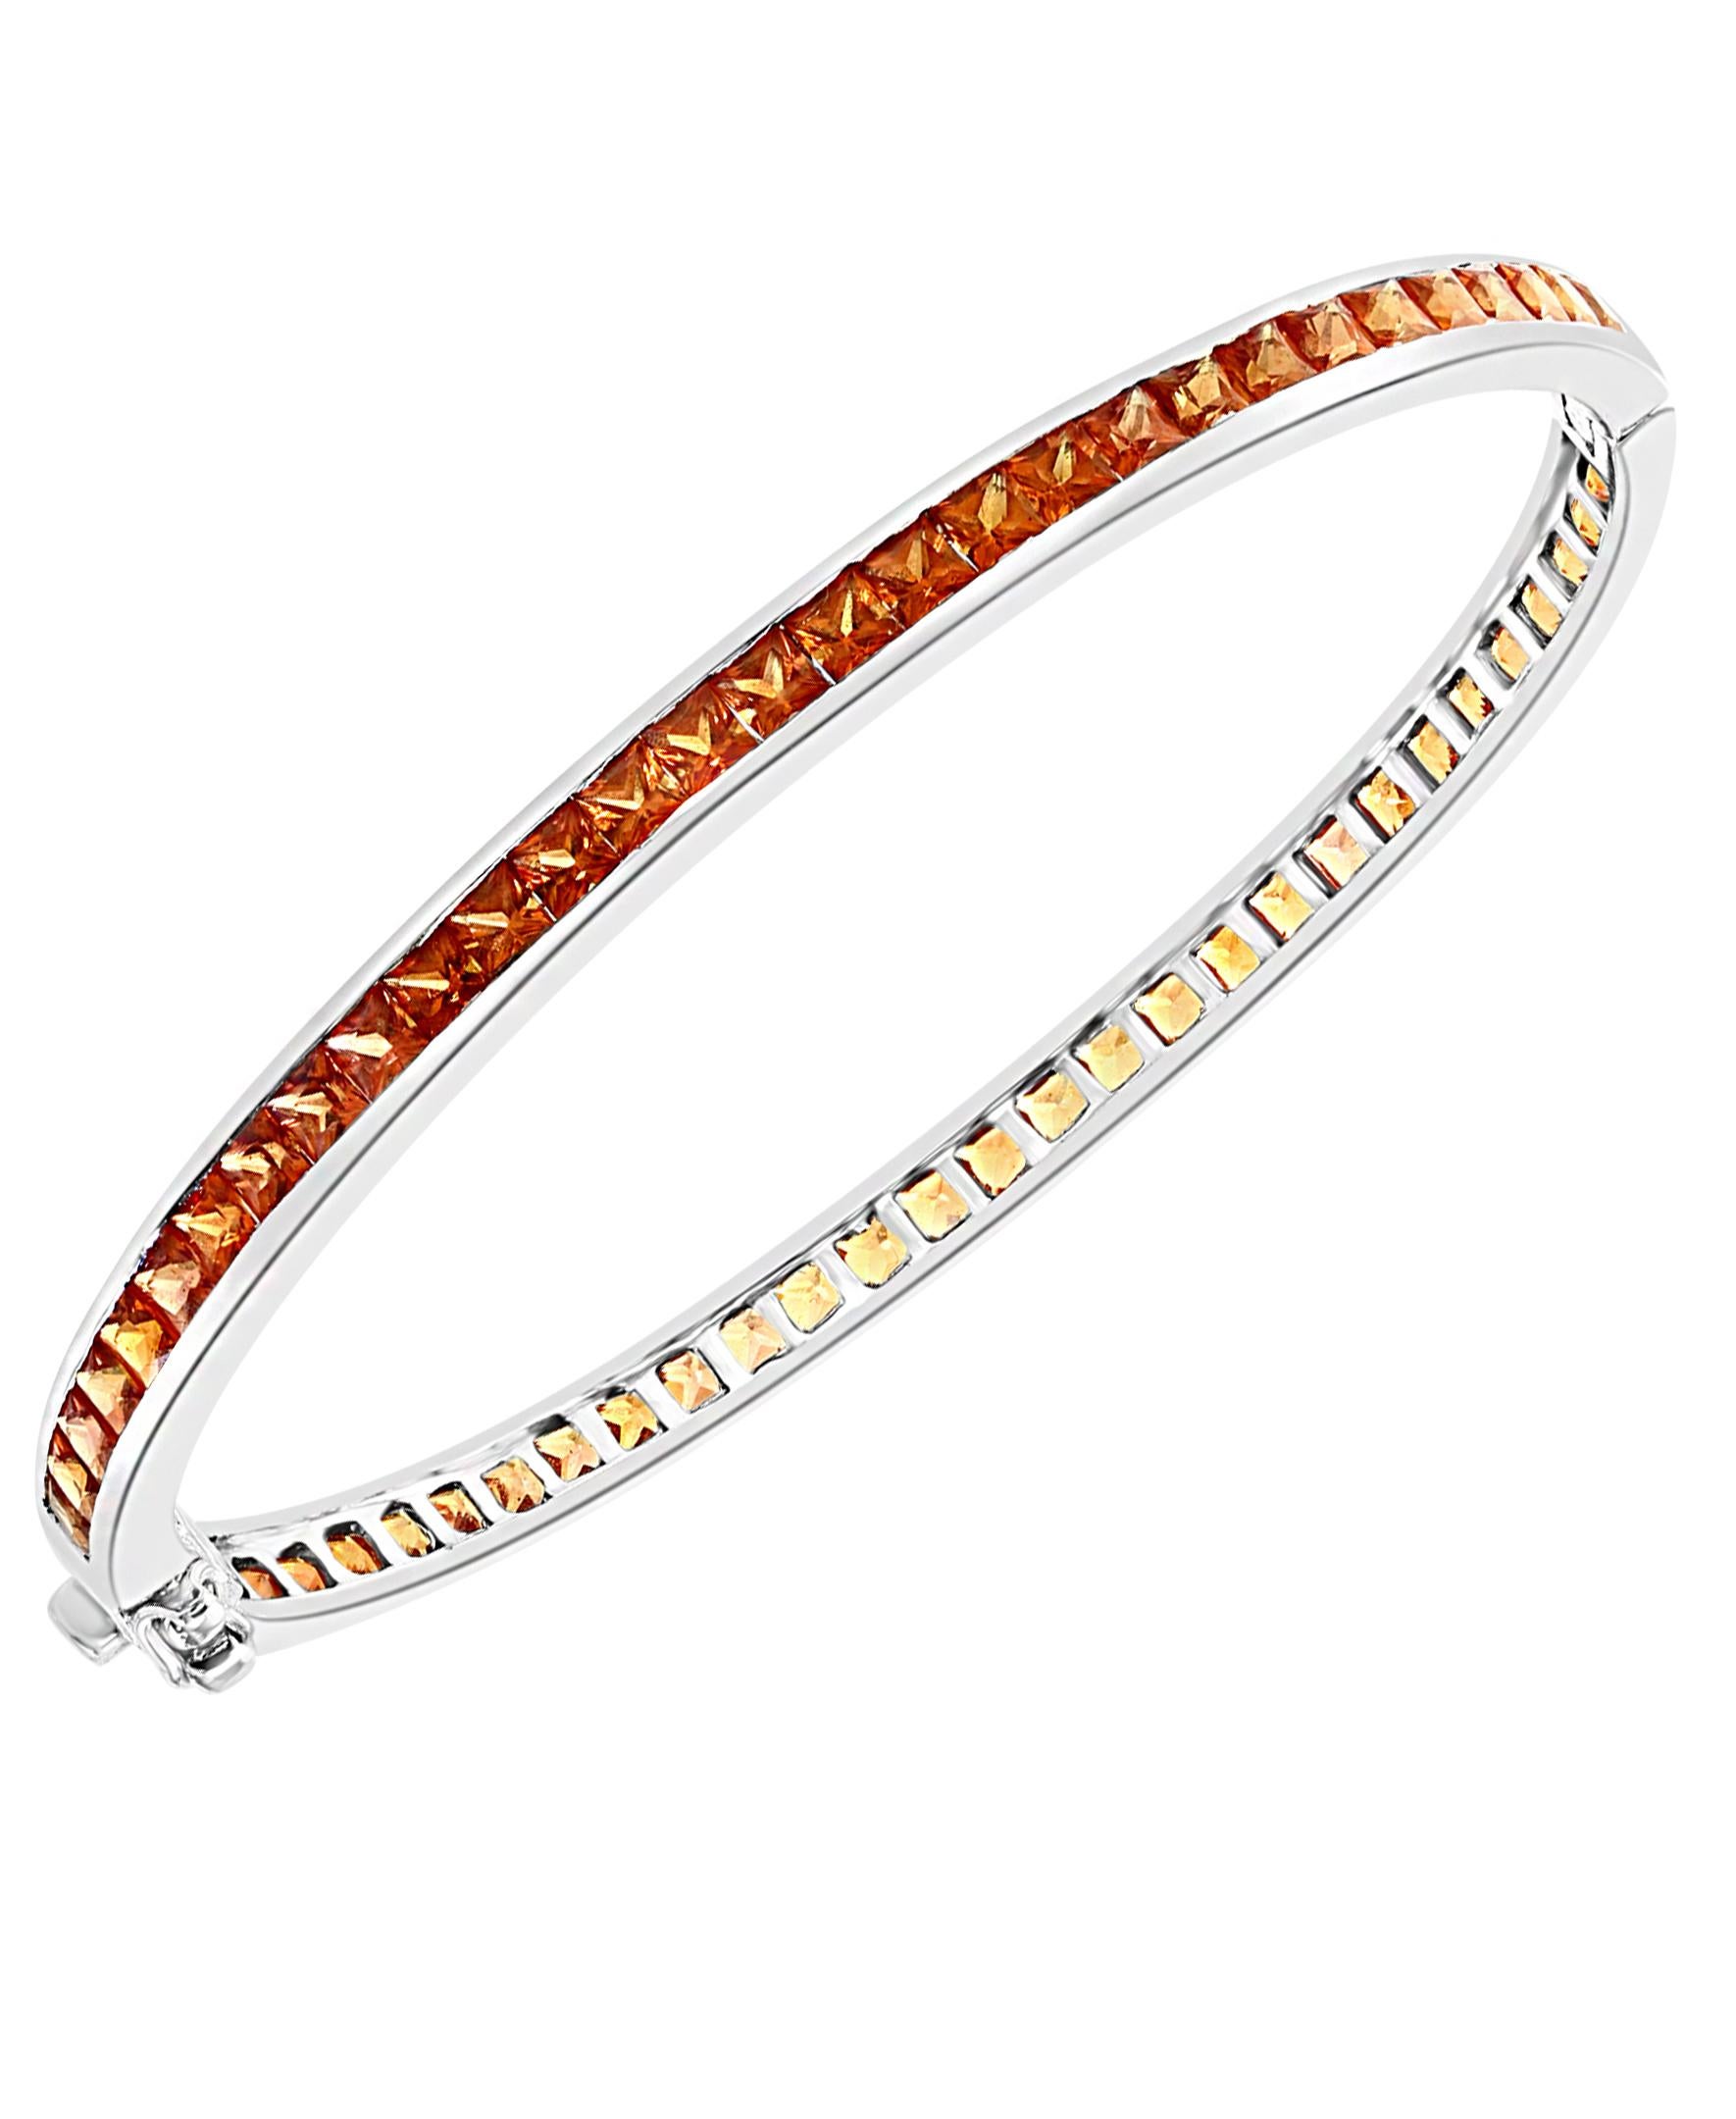 25 Carat  Natural Orange Sapphire Bangle /Bracelet Pair In  14 Karat White Gold 25 Grams
It features a bangle style  Bracelet crafted from  14 karat White gold and embedded with   total approximately 13 Carats natural orange sapphires in  Princess